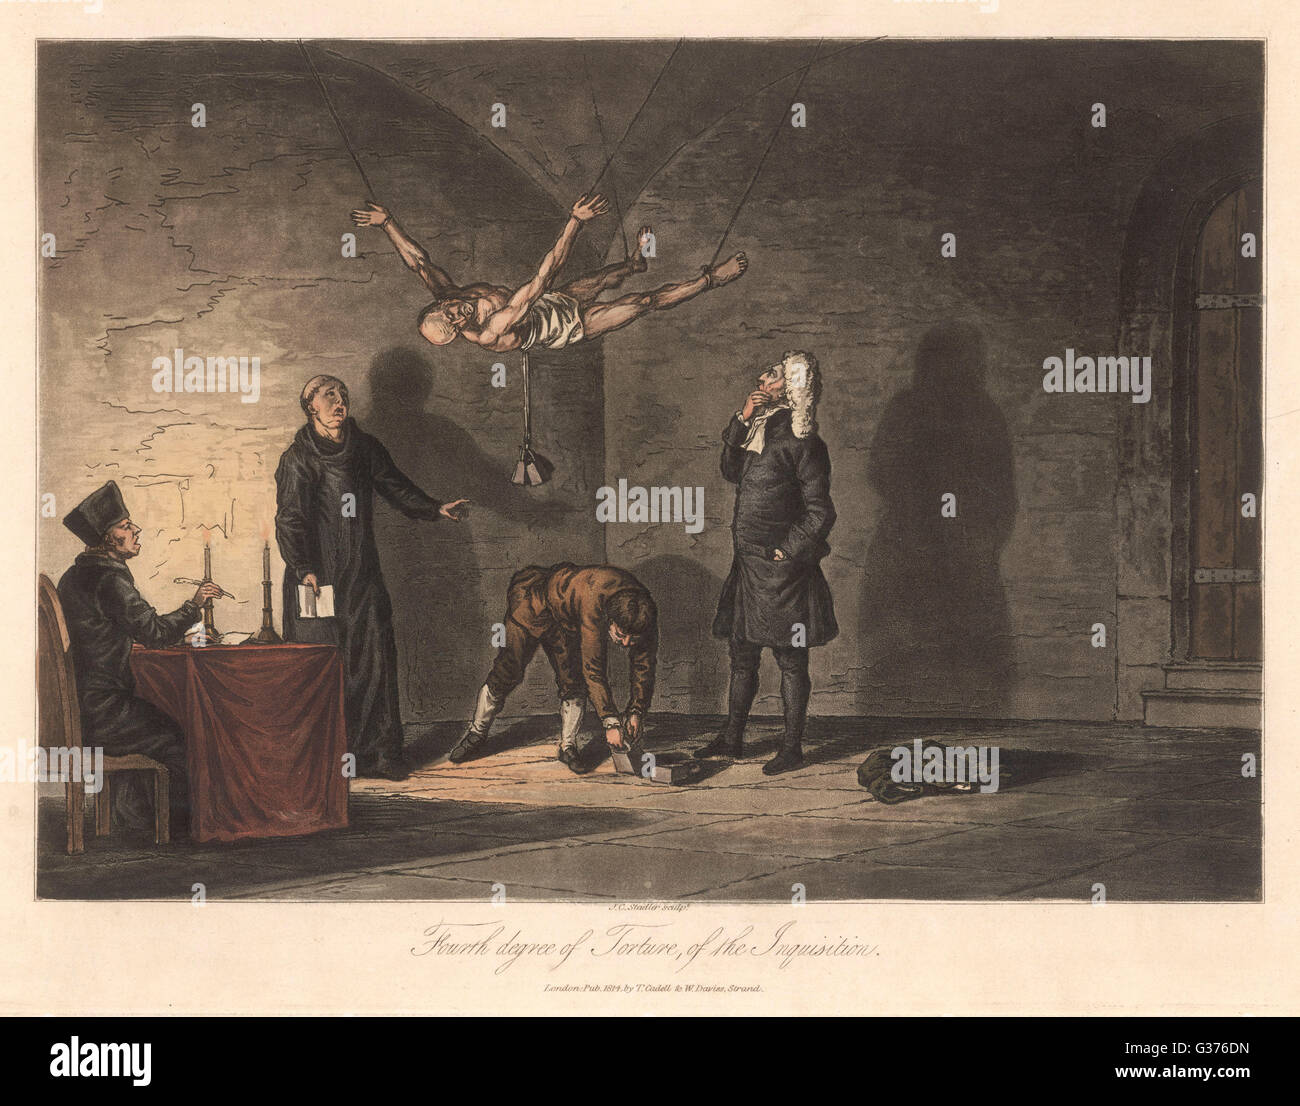 'FOURTH DEGREE OF TORTURE OF  THE INQUISITION' - the victim  is suspended in the air, with  weights attached to his body,  dislocating his spine and  eventually breaking it.     Date: 1813 Stock Photo